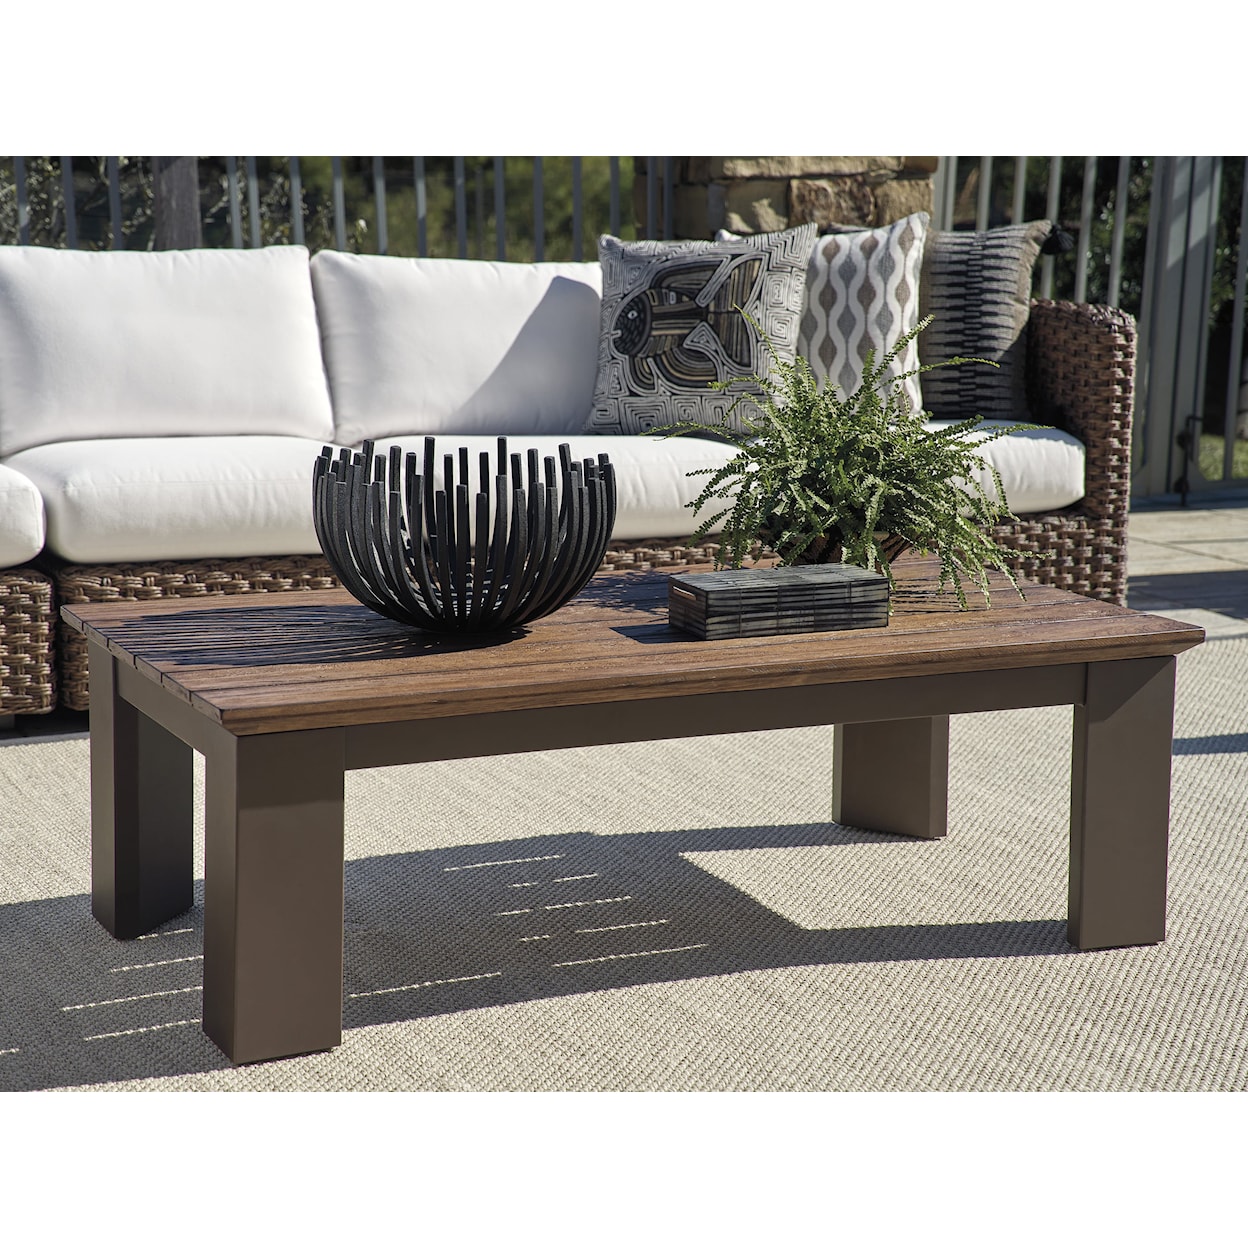 Tommy Bahama Outdoor Living Kilimanjaro Rect Cocktail Table